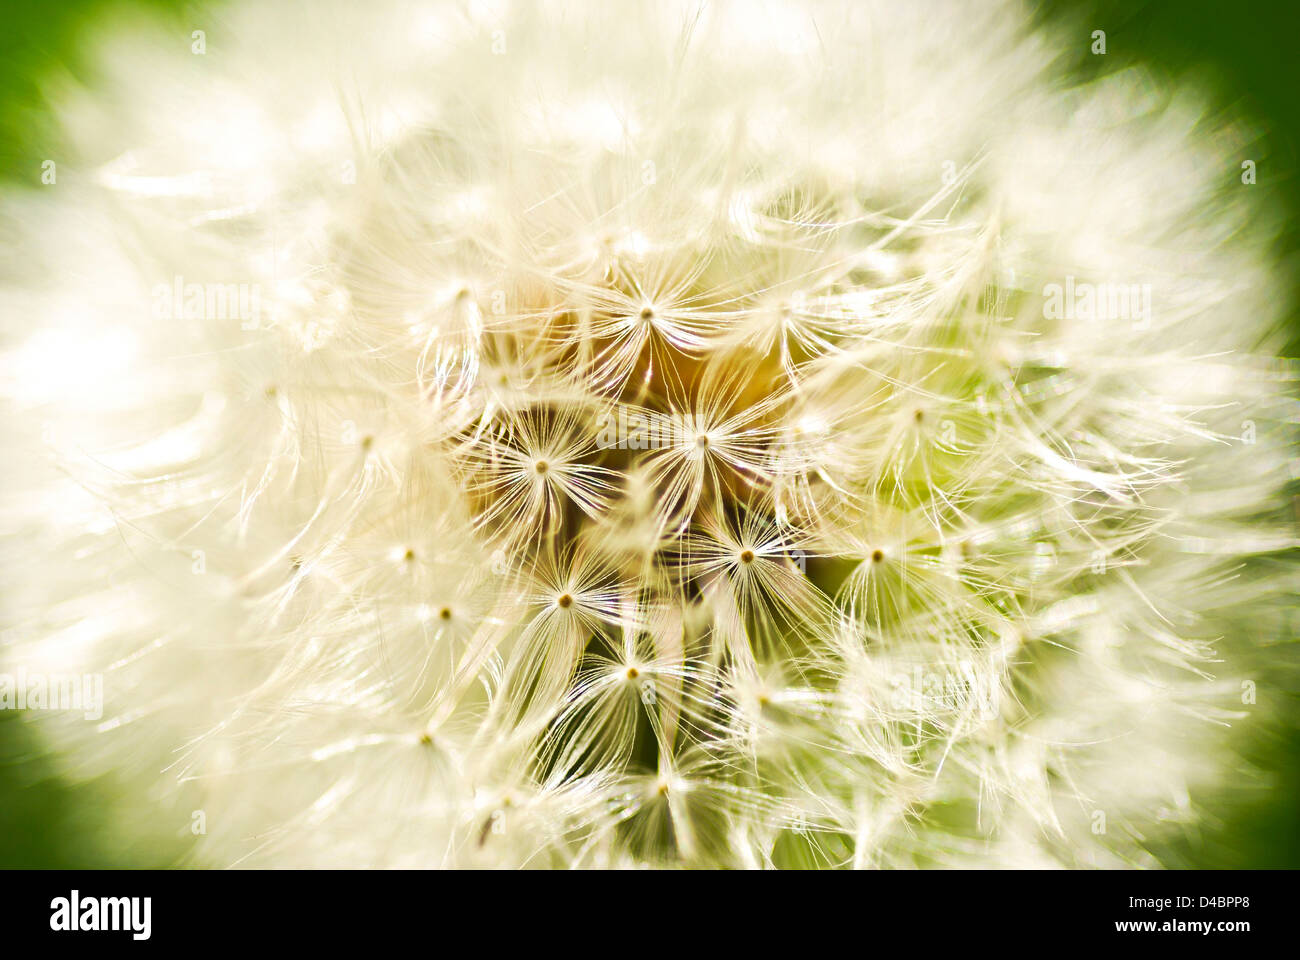 CLOSE UP OF A DANDELION SHOWING GLOBULAR HEAD WITH SEED'S AND DOWNY TUFT'S Stock Photo